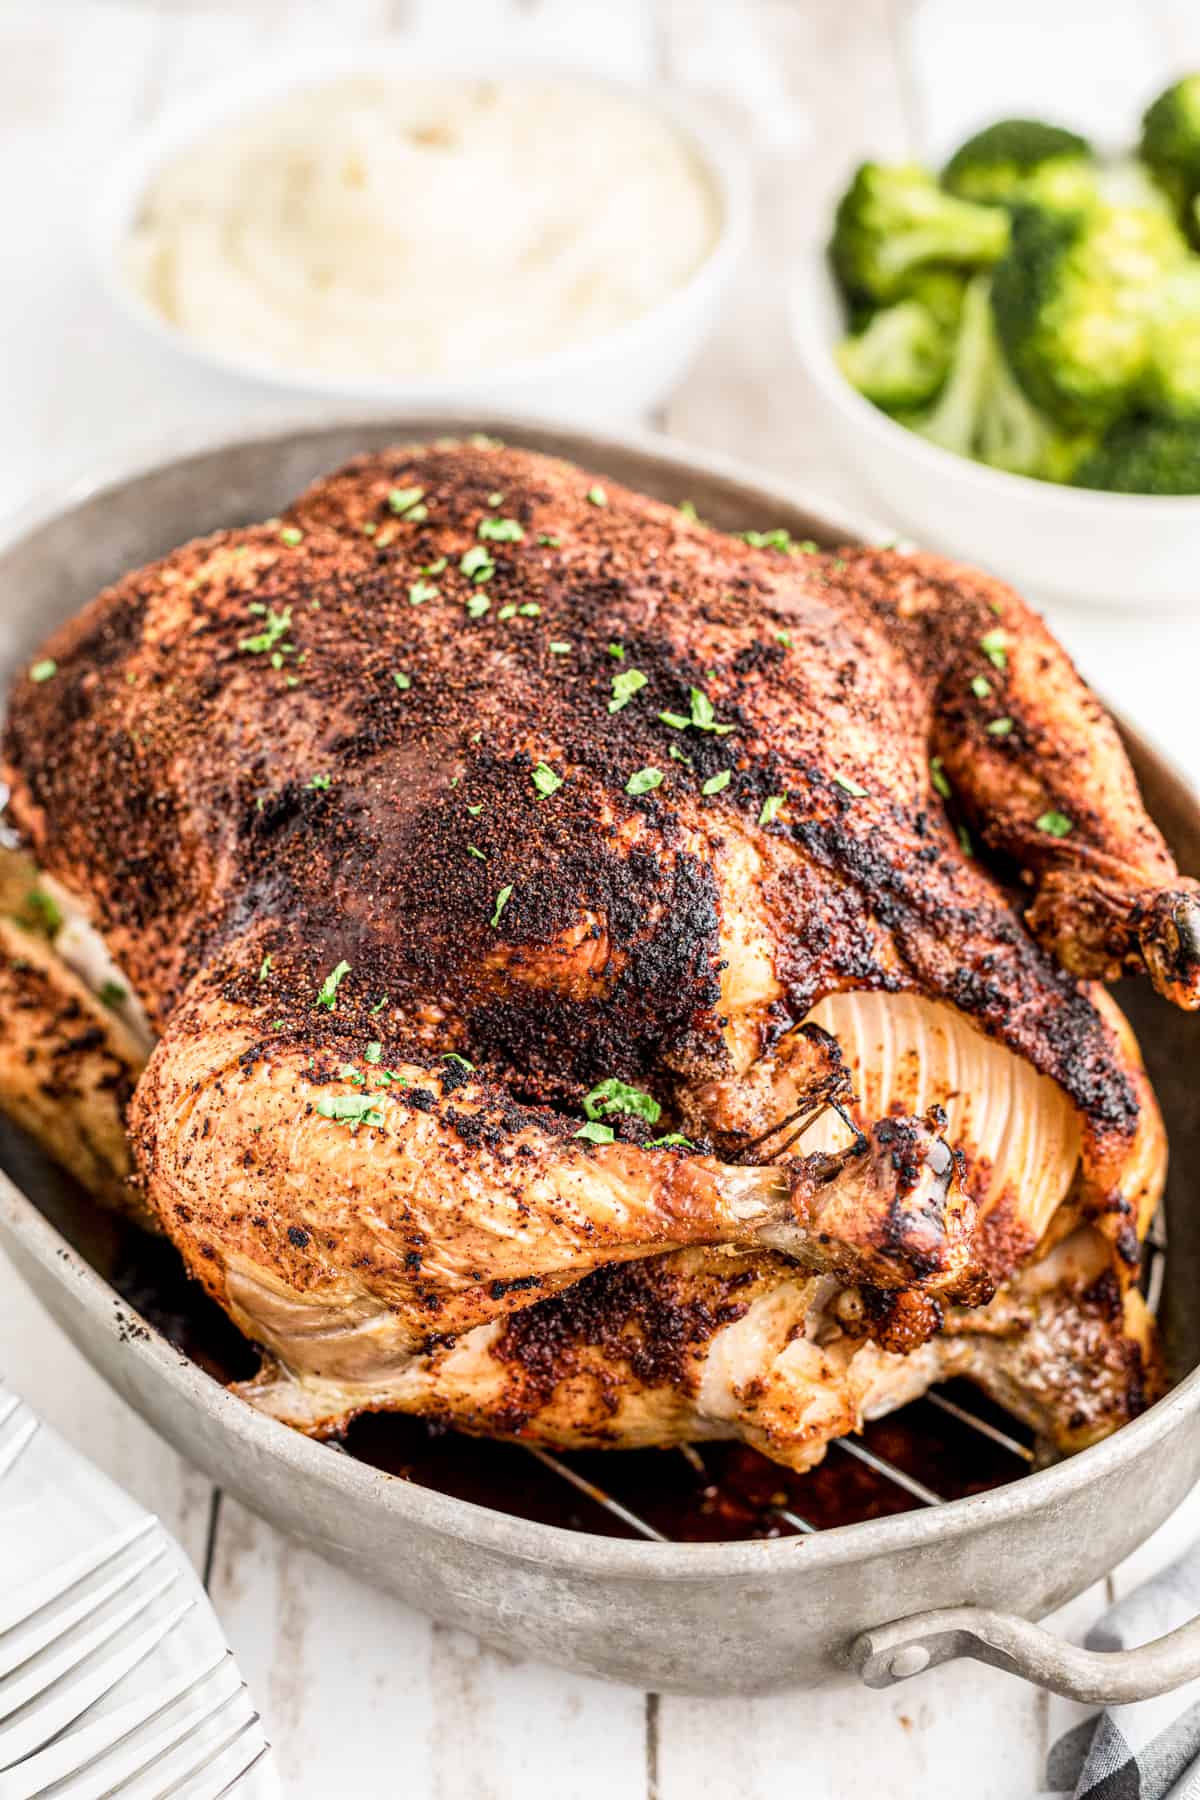 Whole Roasted Chicken finished in roasting pan with parsley and side dishes in background.